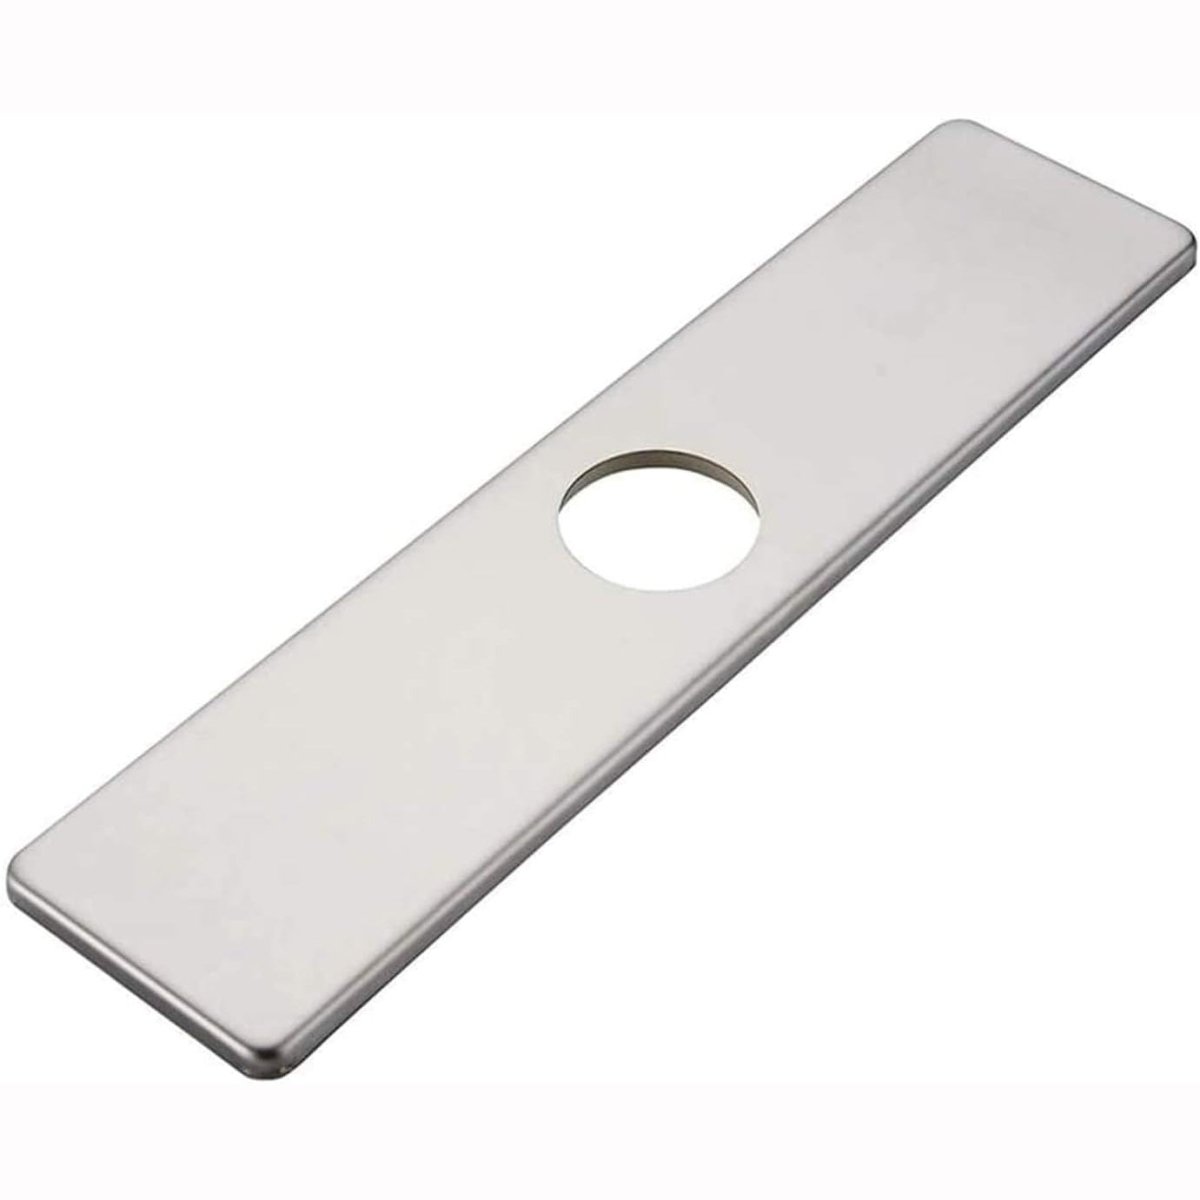 10 Inch Sink Hole Cover Deck Plate Brushed Nickel - buyfaucet.com